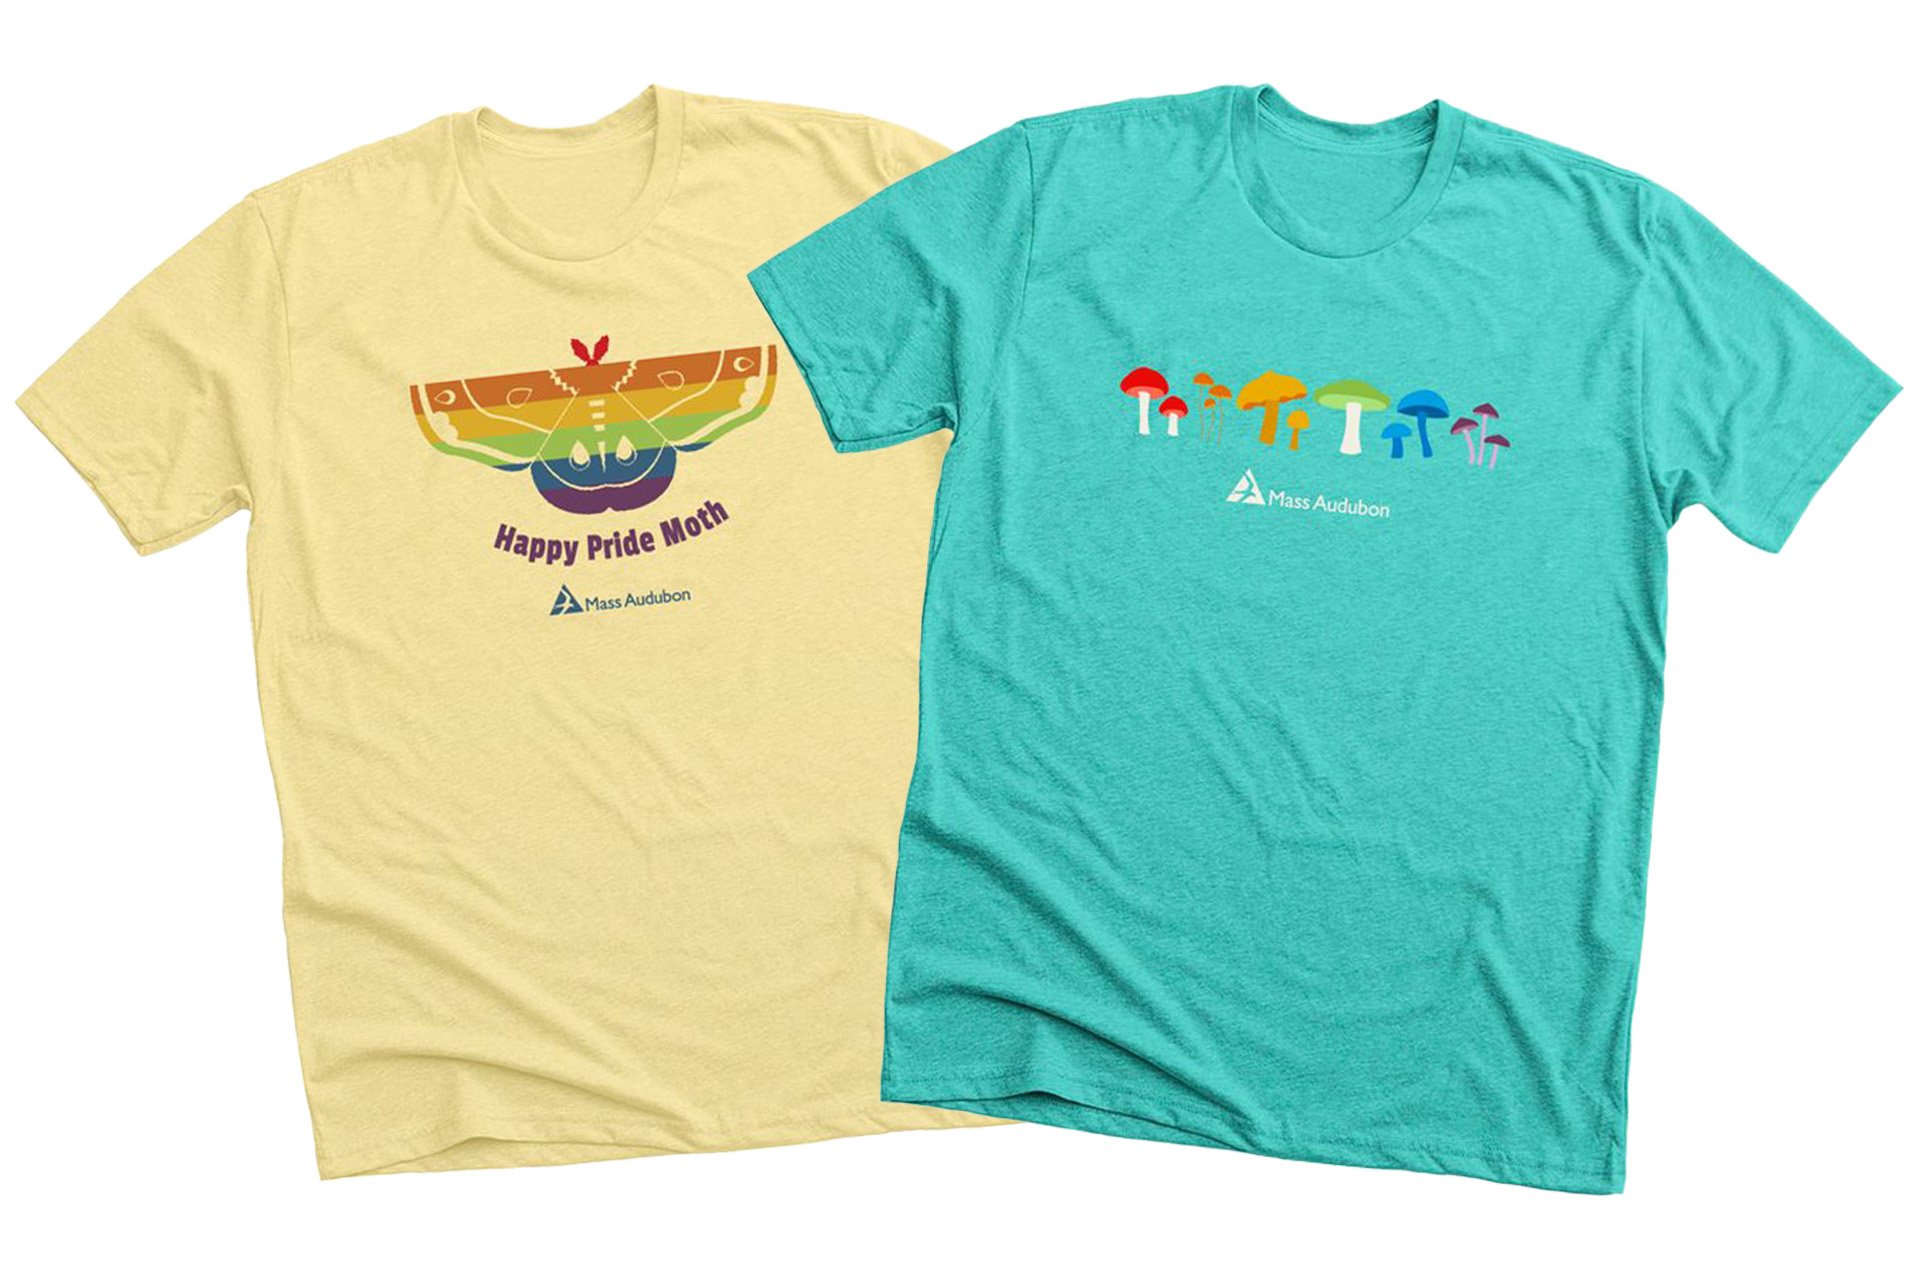 Two short-sleeve t-shirts with graphics and the Mass Audubon logo on the chest: one shirt is yellow with a rainbow moth icon and the words "Happy Pride Moth", the other is blue with a rainbow of different kinds of mushrooms in a row..